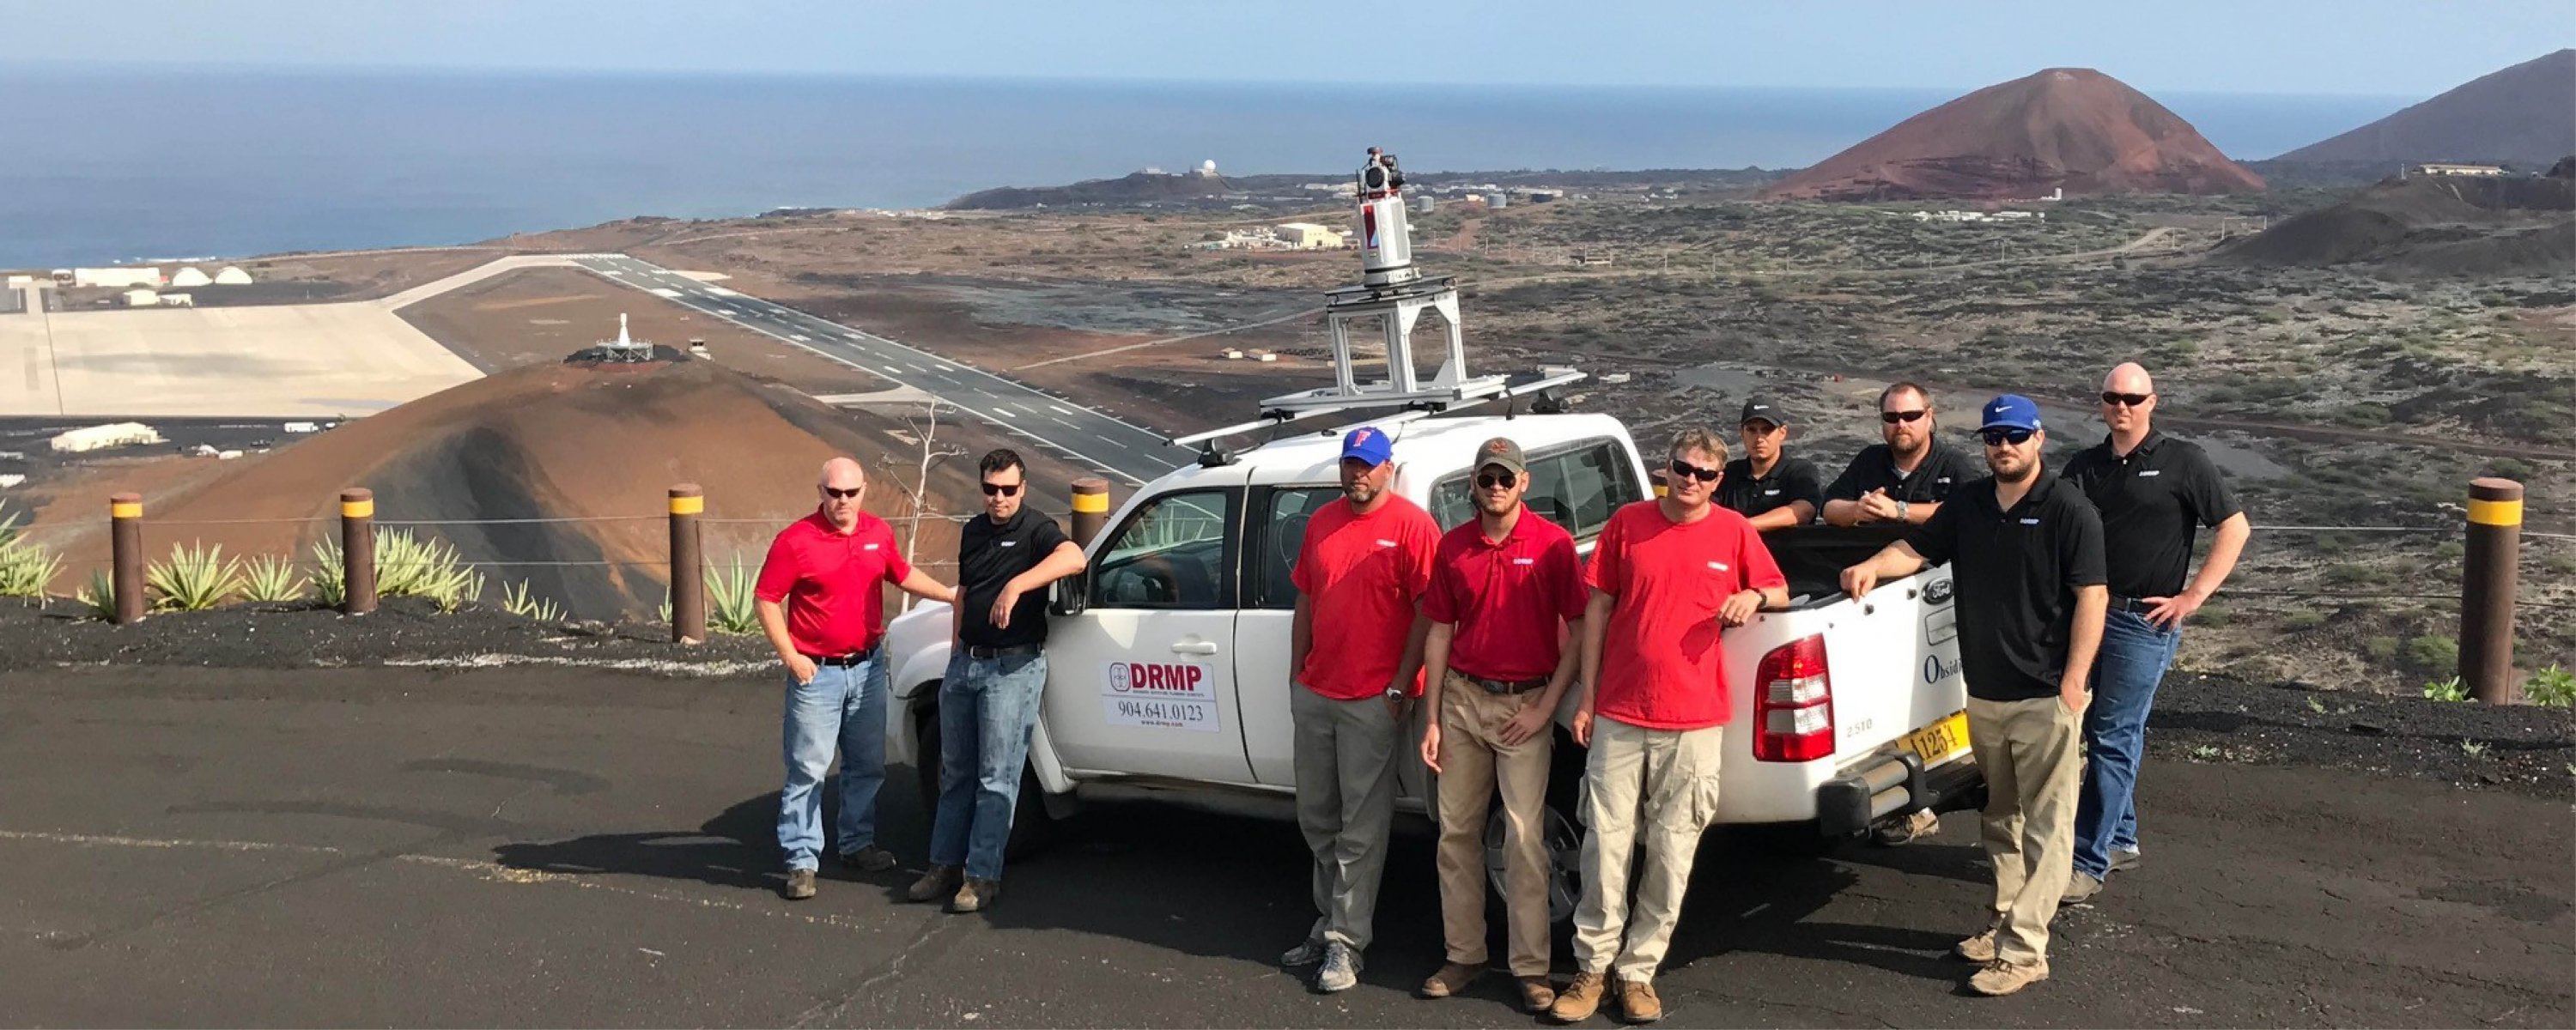 Expertise Project Photo Gallery Ascension Island